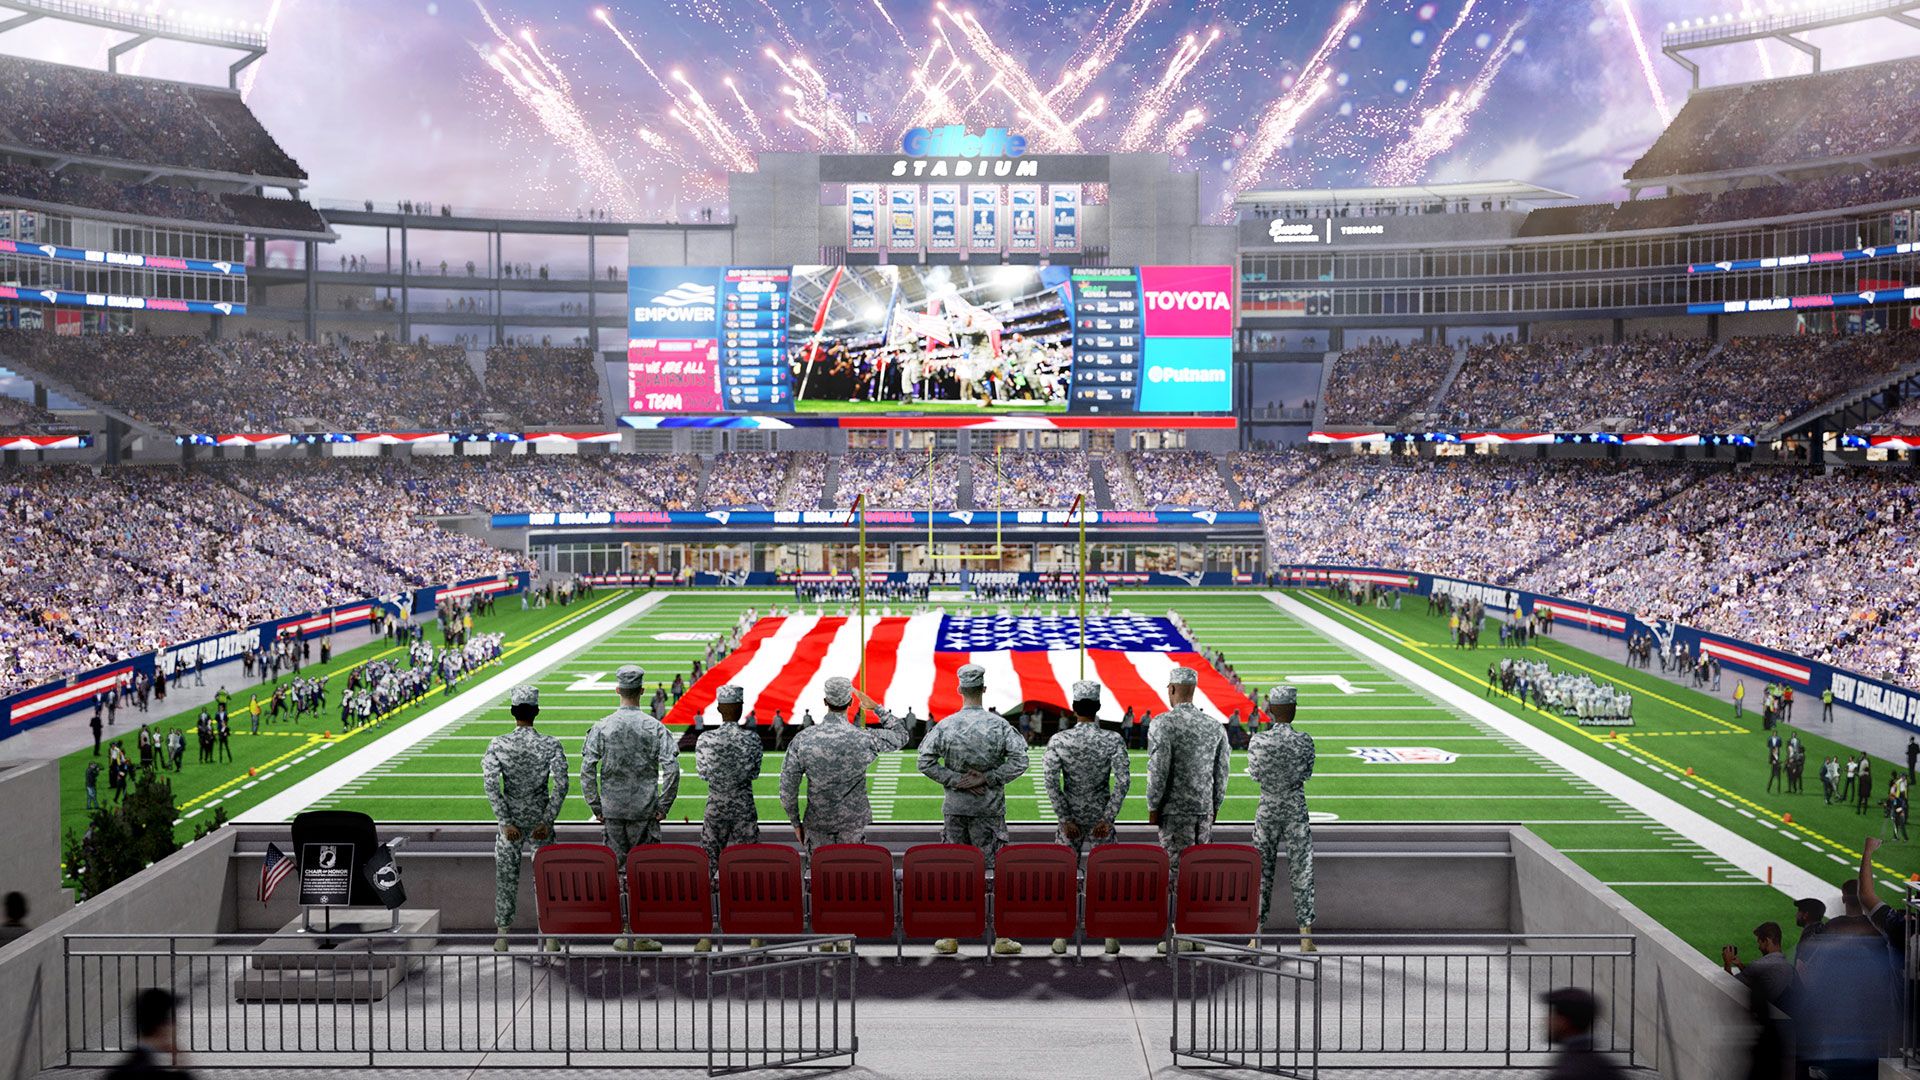 Upgrades to Gillette Stadium's 'Row of Honor' announced on Memorial Day